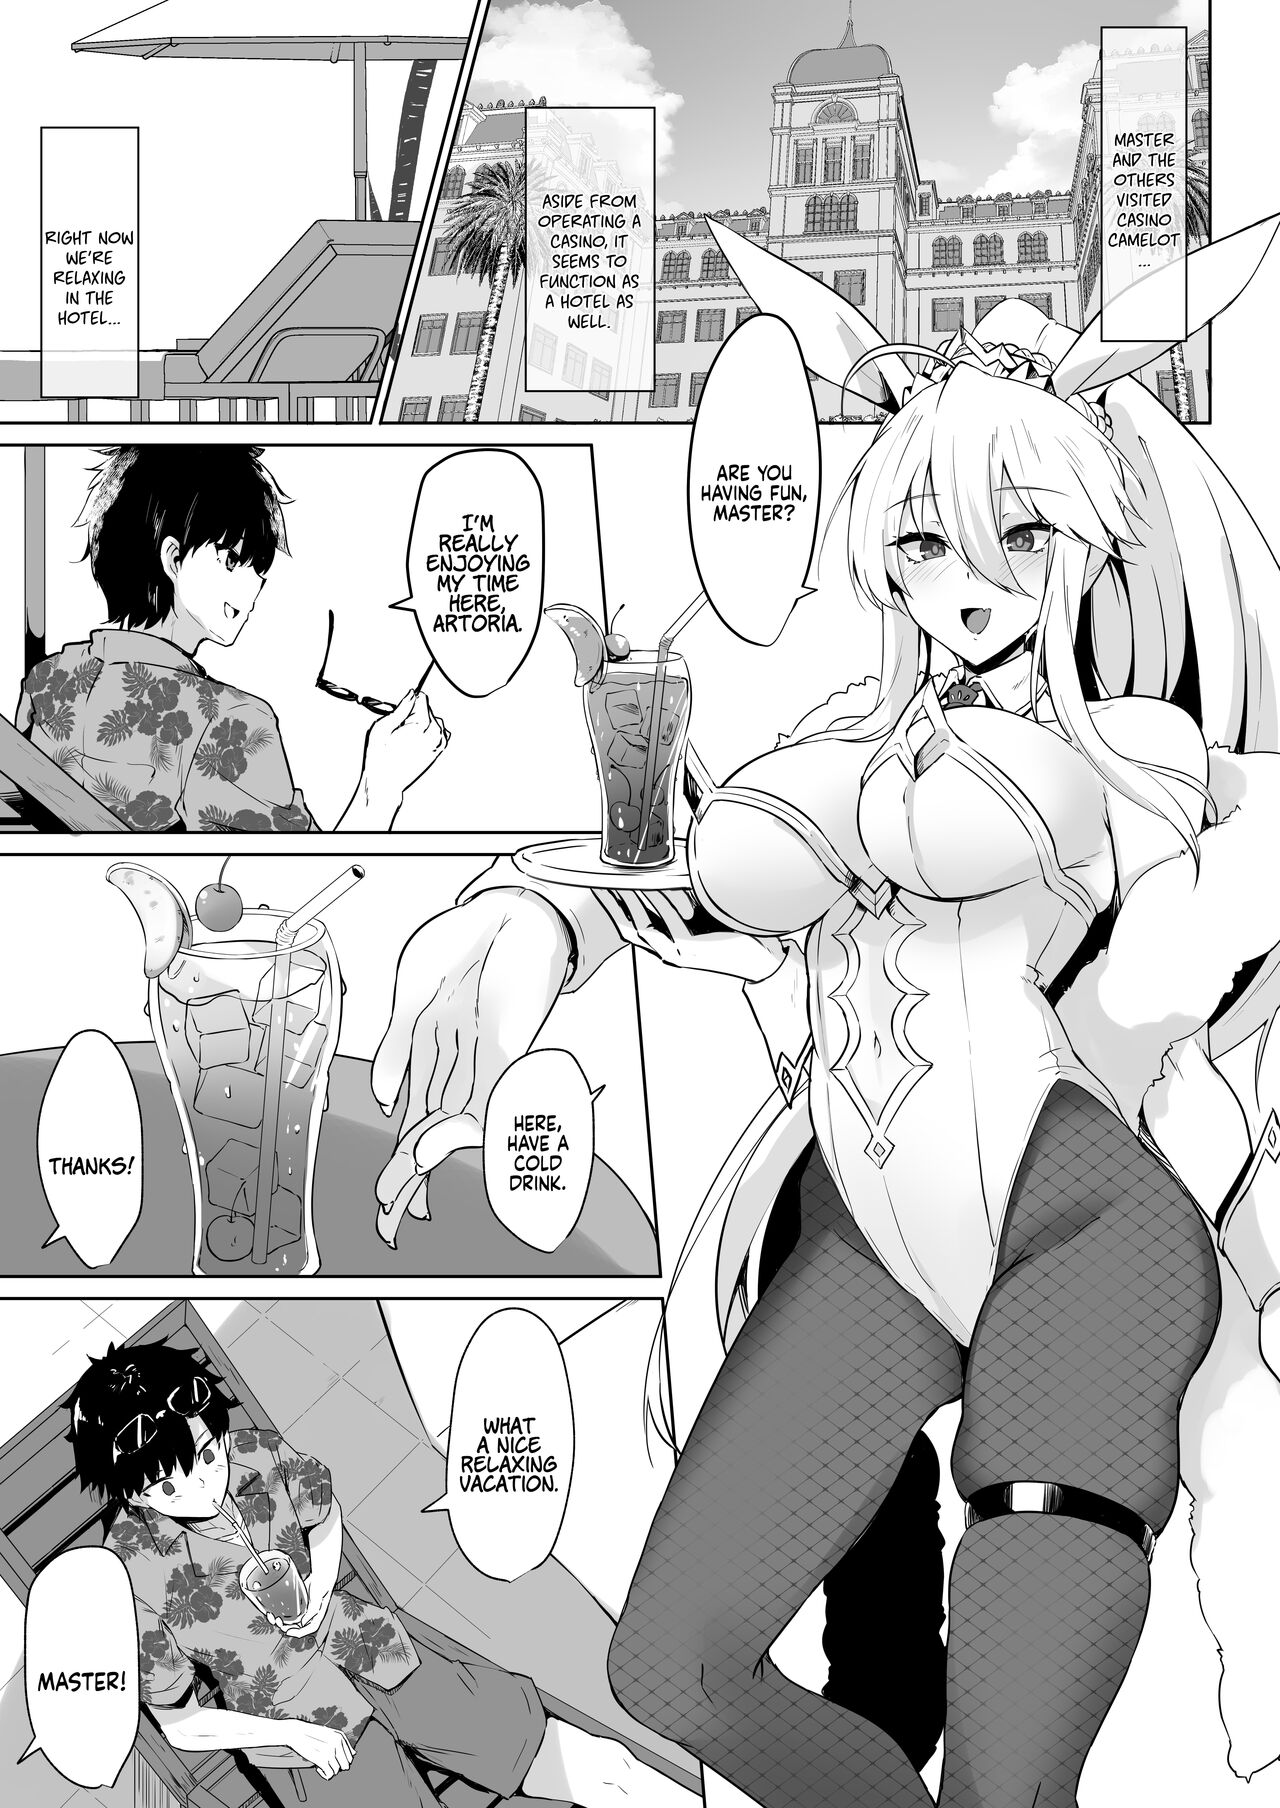 The Hospitality Of The Bunny King Fate Grand Order 05